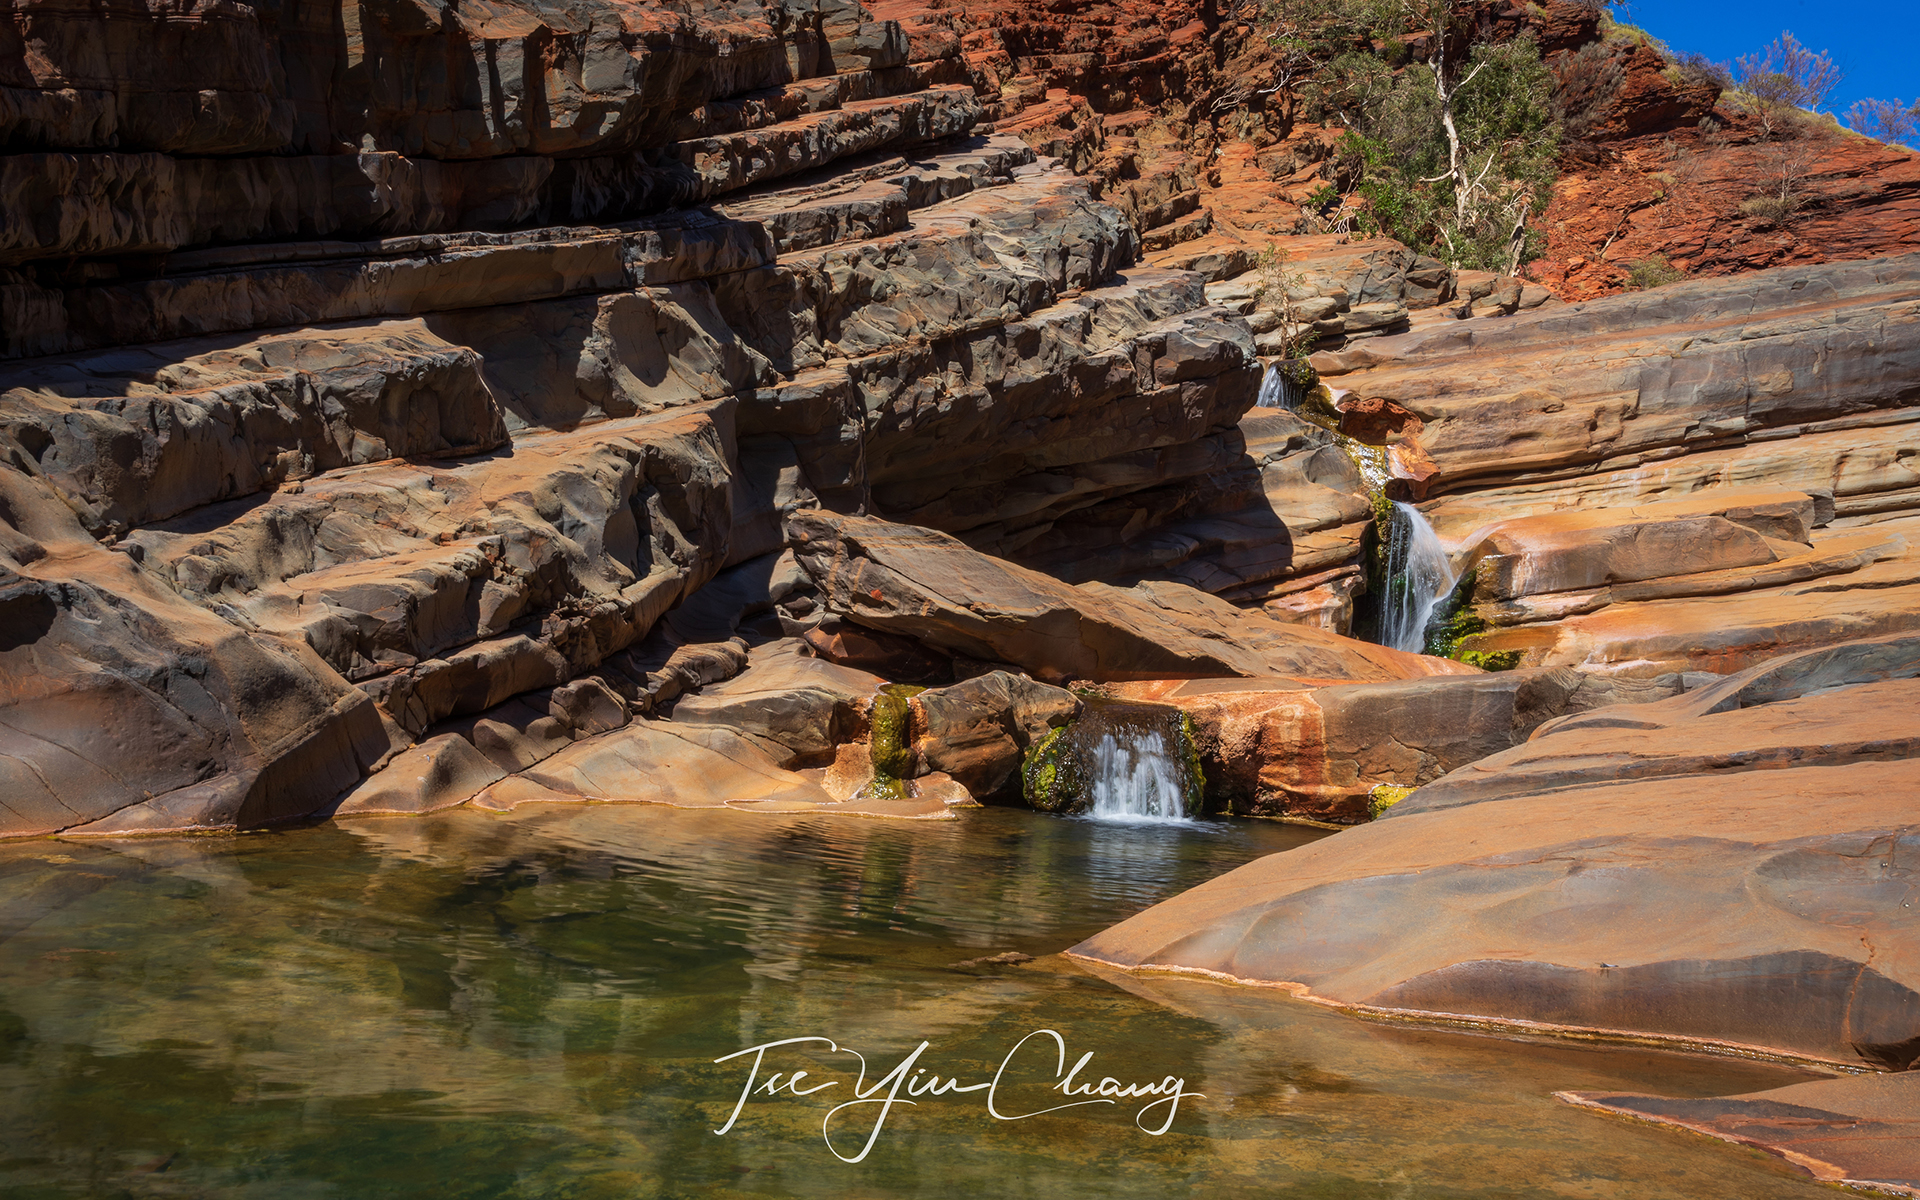 Hamersley Gorge is an idyllic swimming hole. You can descend into the canyon and clamber along the rocks past a succession of pools